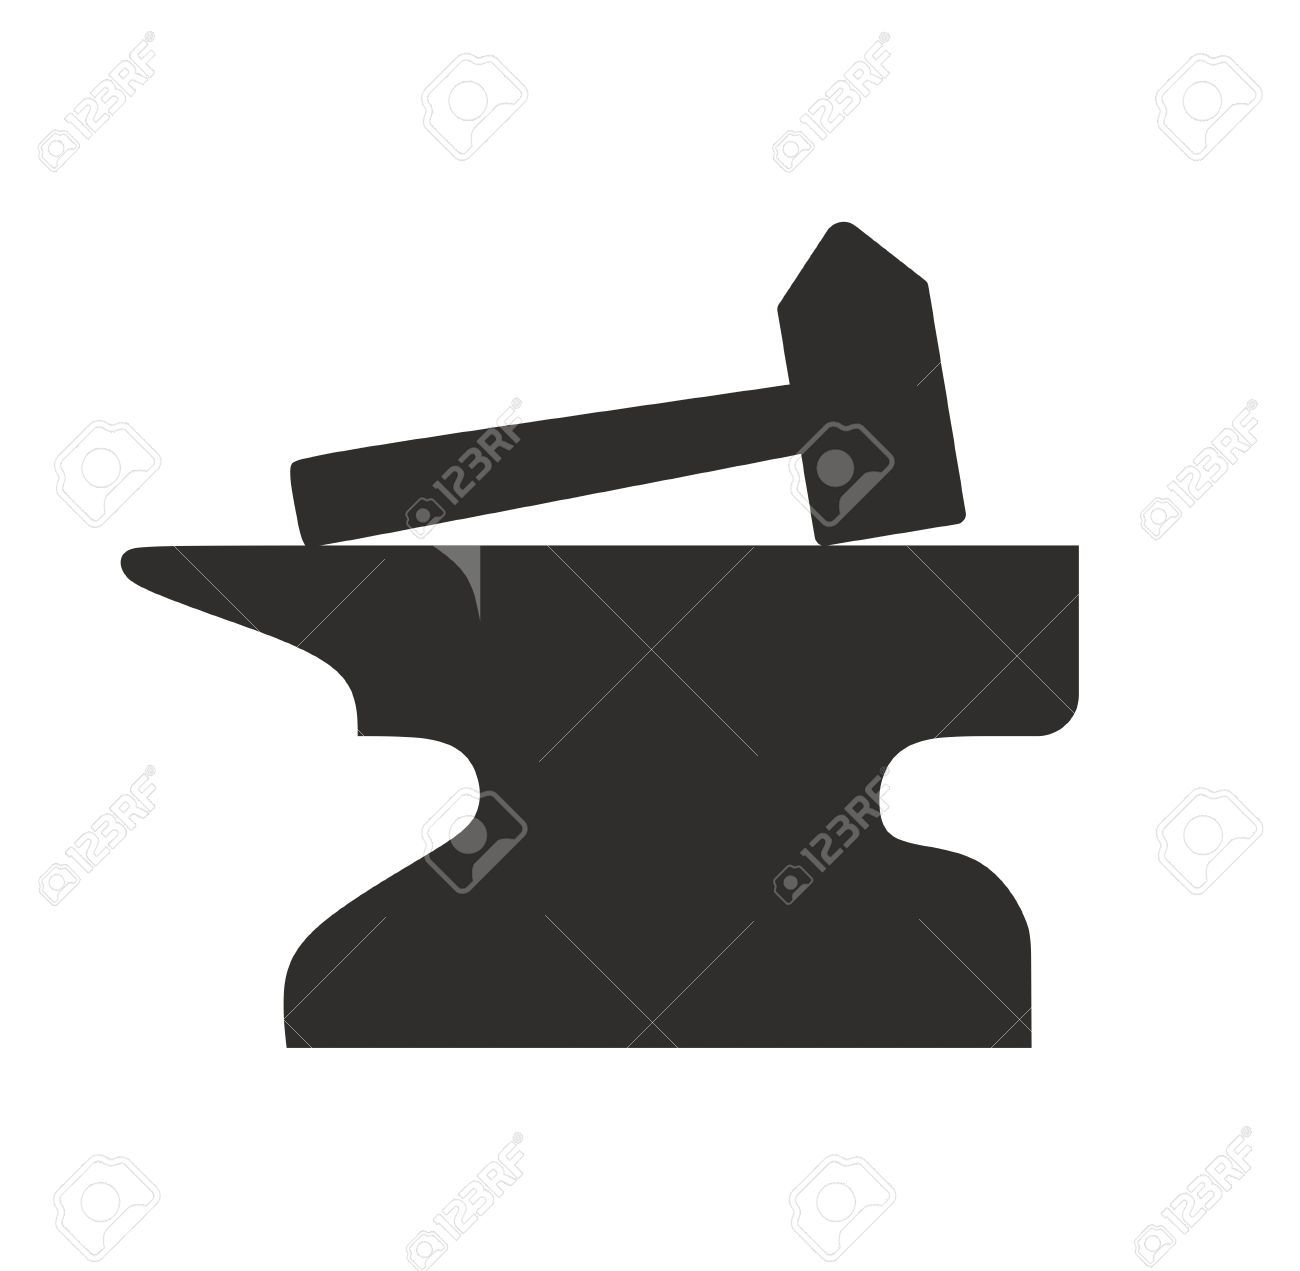 Anvil clipart silversmith. Hammer and as symbol